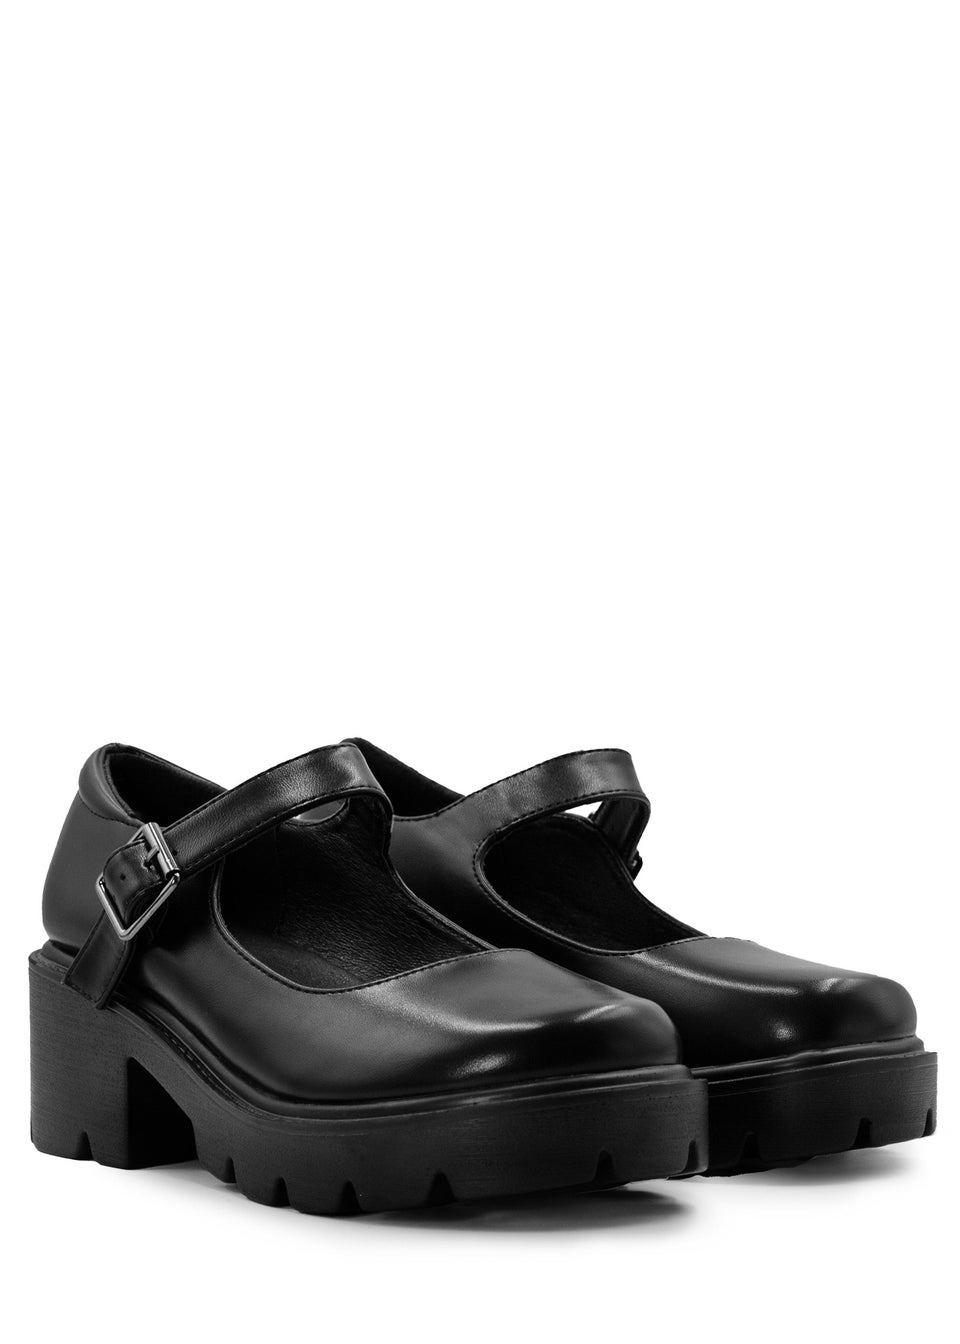 Where's That From Black Pu Rylee Chunky Platform Retro Loafers